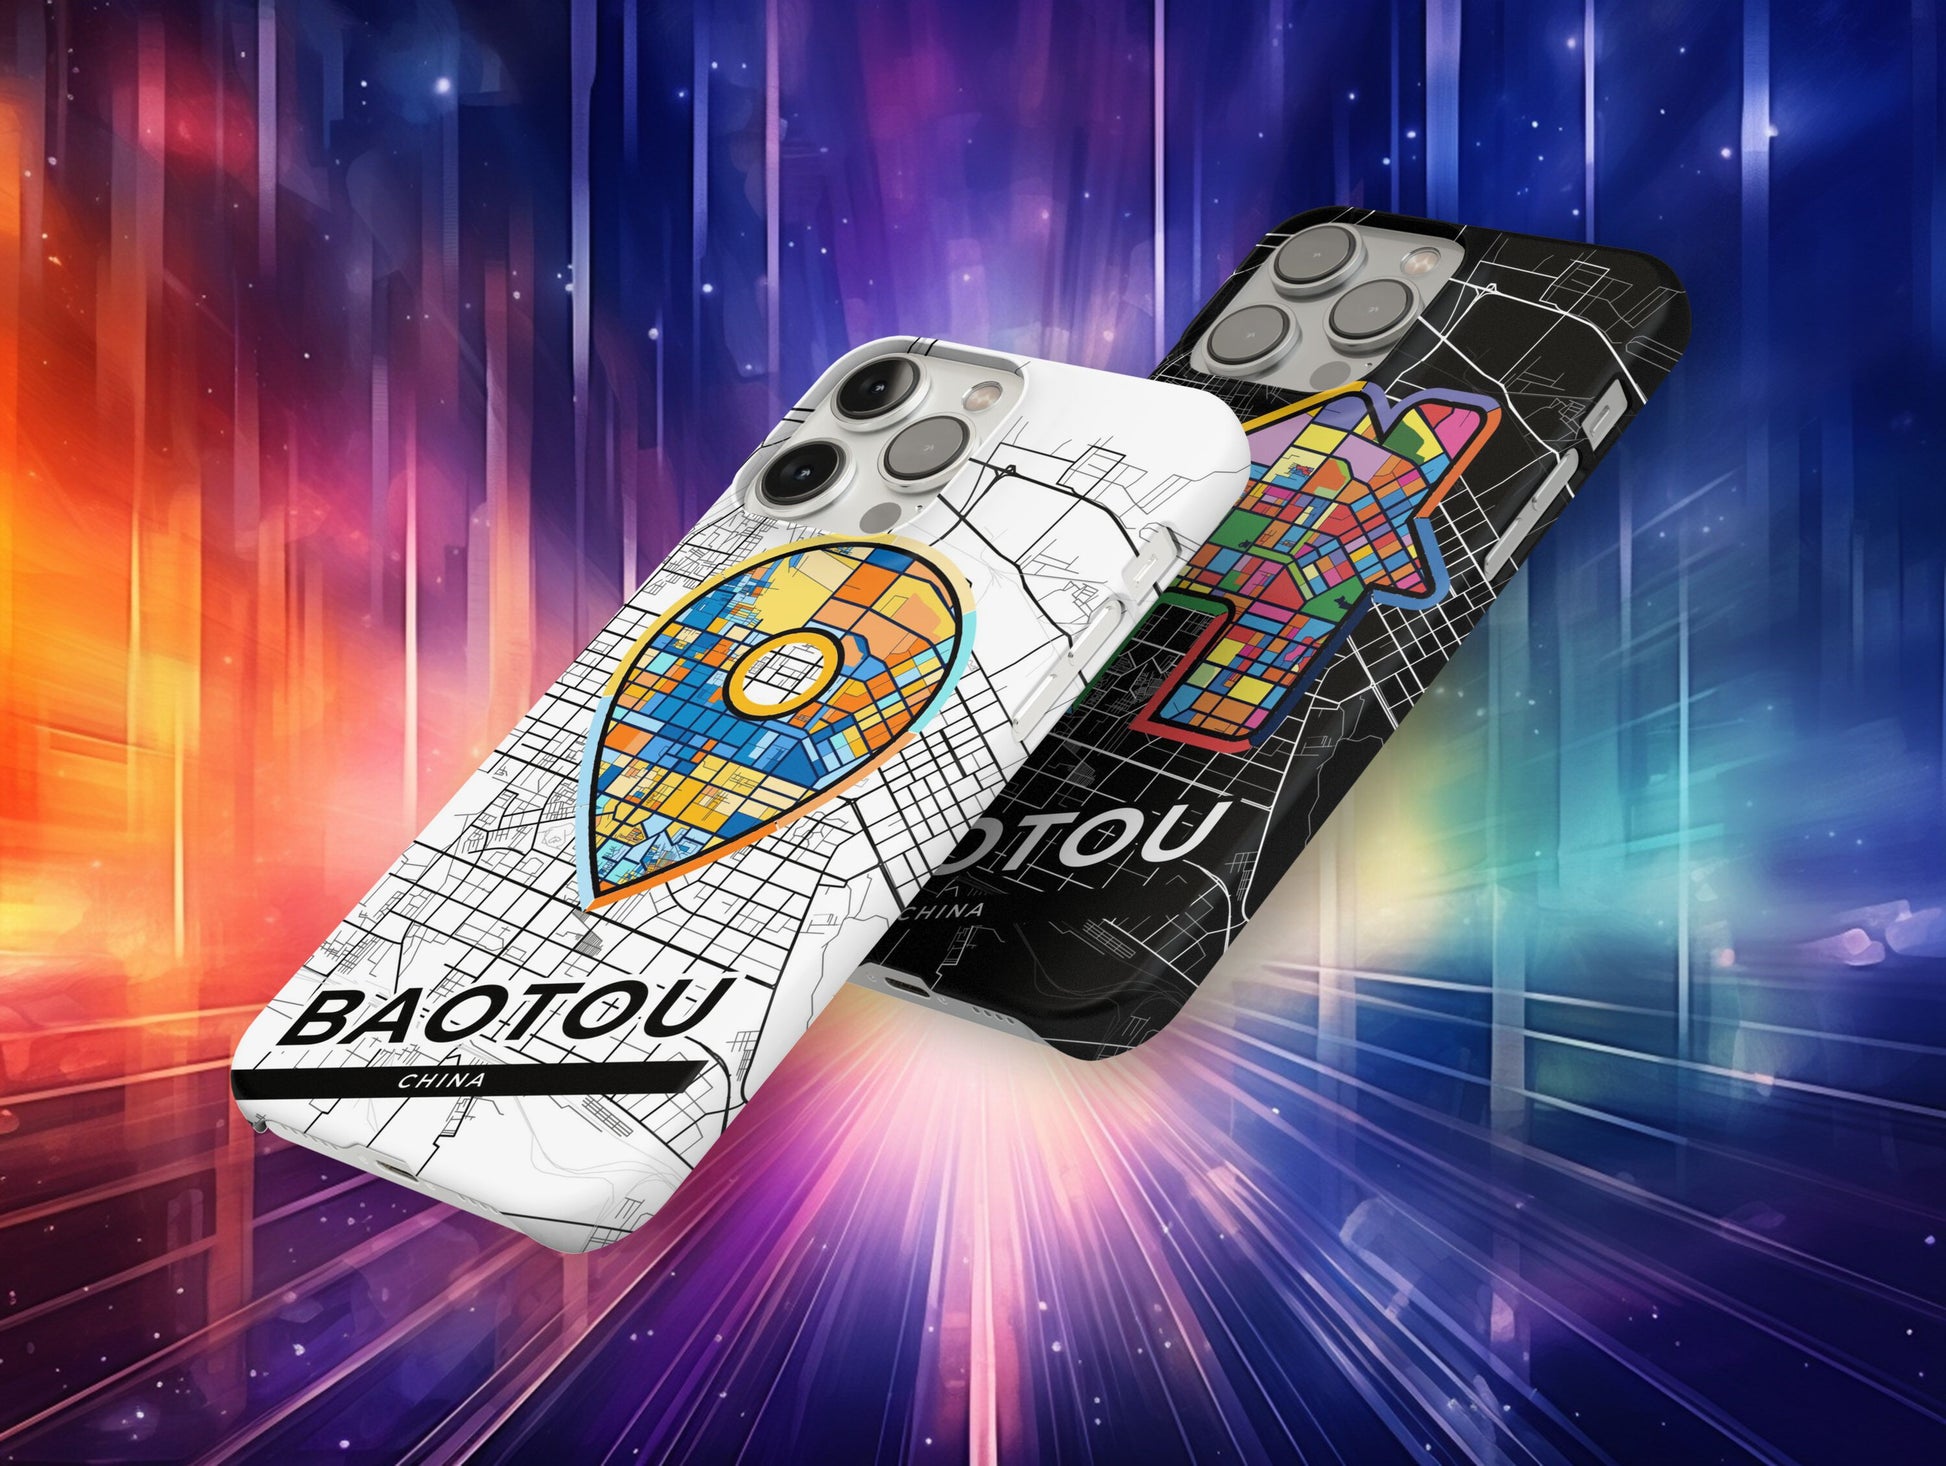 Baotou China slim phone case with colorful icon. Birthday, wedding or housewarming gift. Couple match cases.